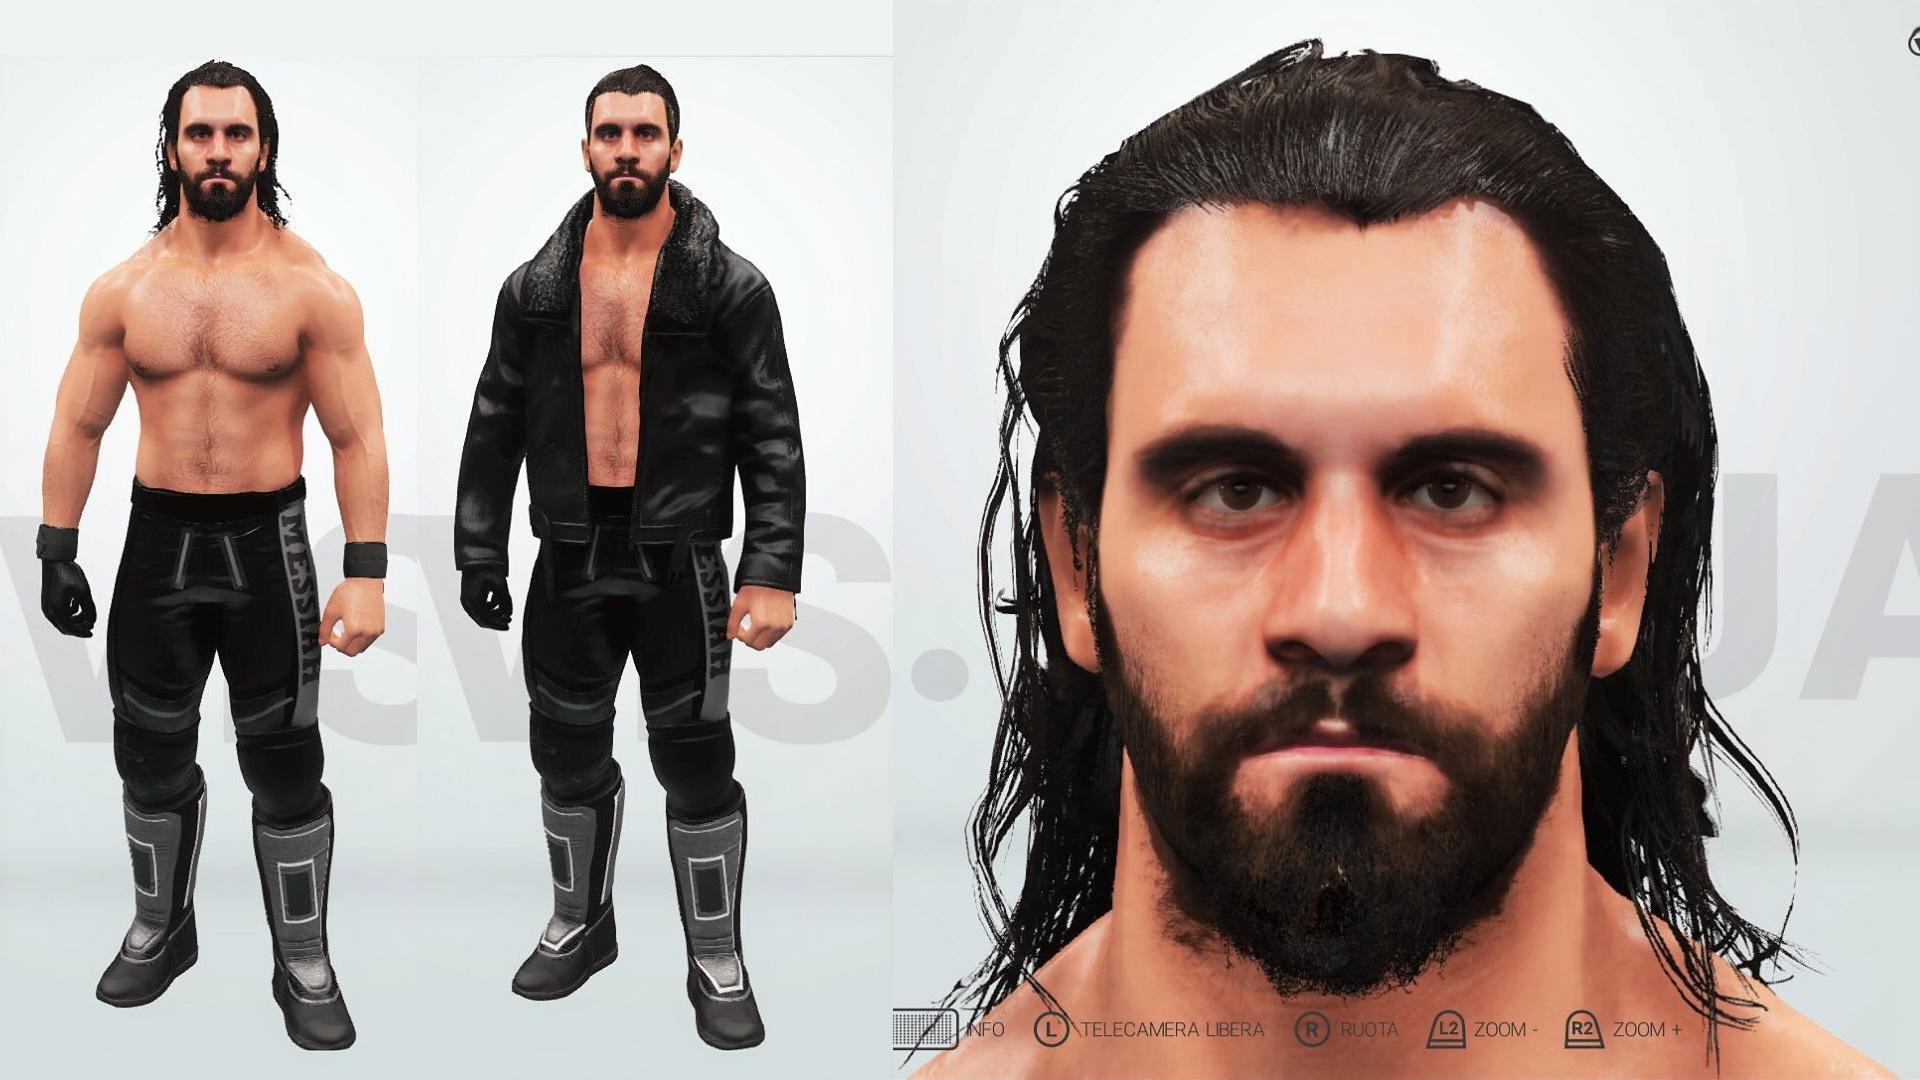 Monday Night Messiah, Seth Rollins uploaded on PS4 by EnzoFolgore & NickBreaker